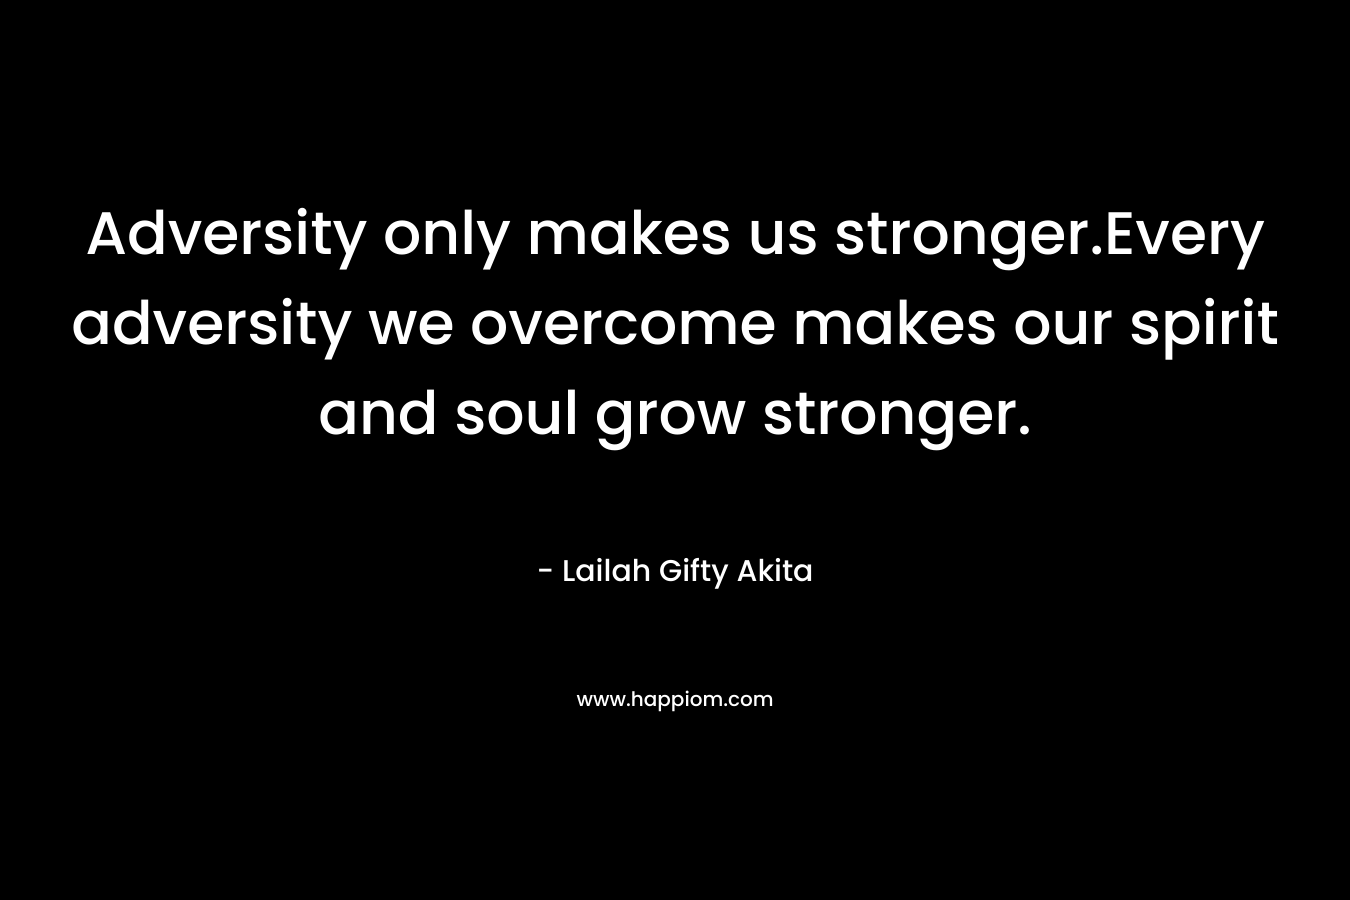 Adversity only makes us stronger.Every adversity we overcome makes our spirit and soul grow stronger.